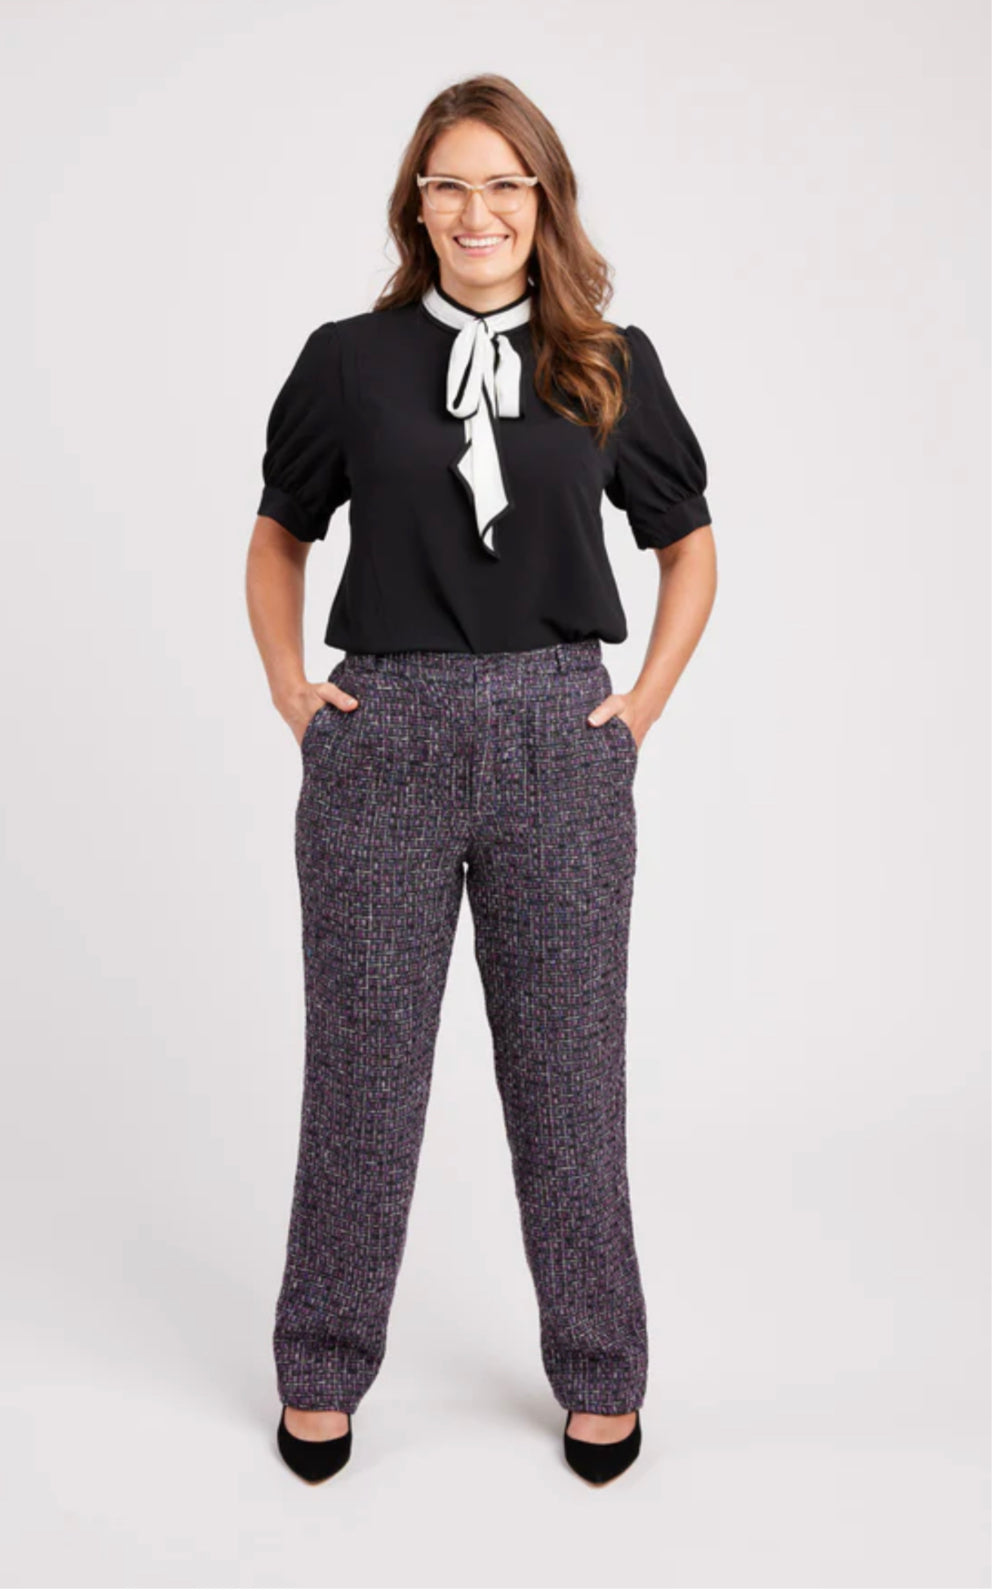 Cashmerette Meriam Trousers Sewing Pattern 0-16